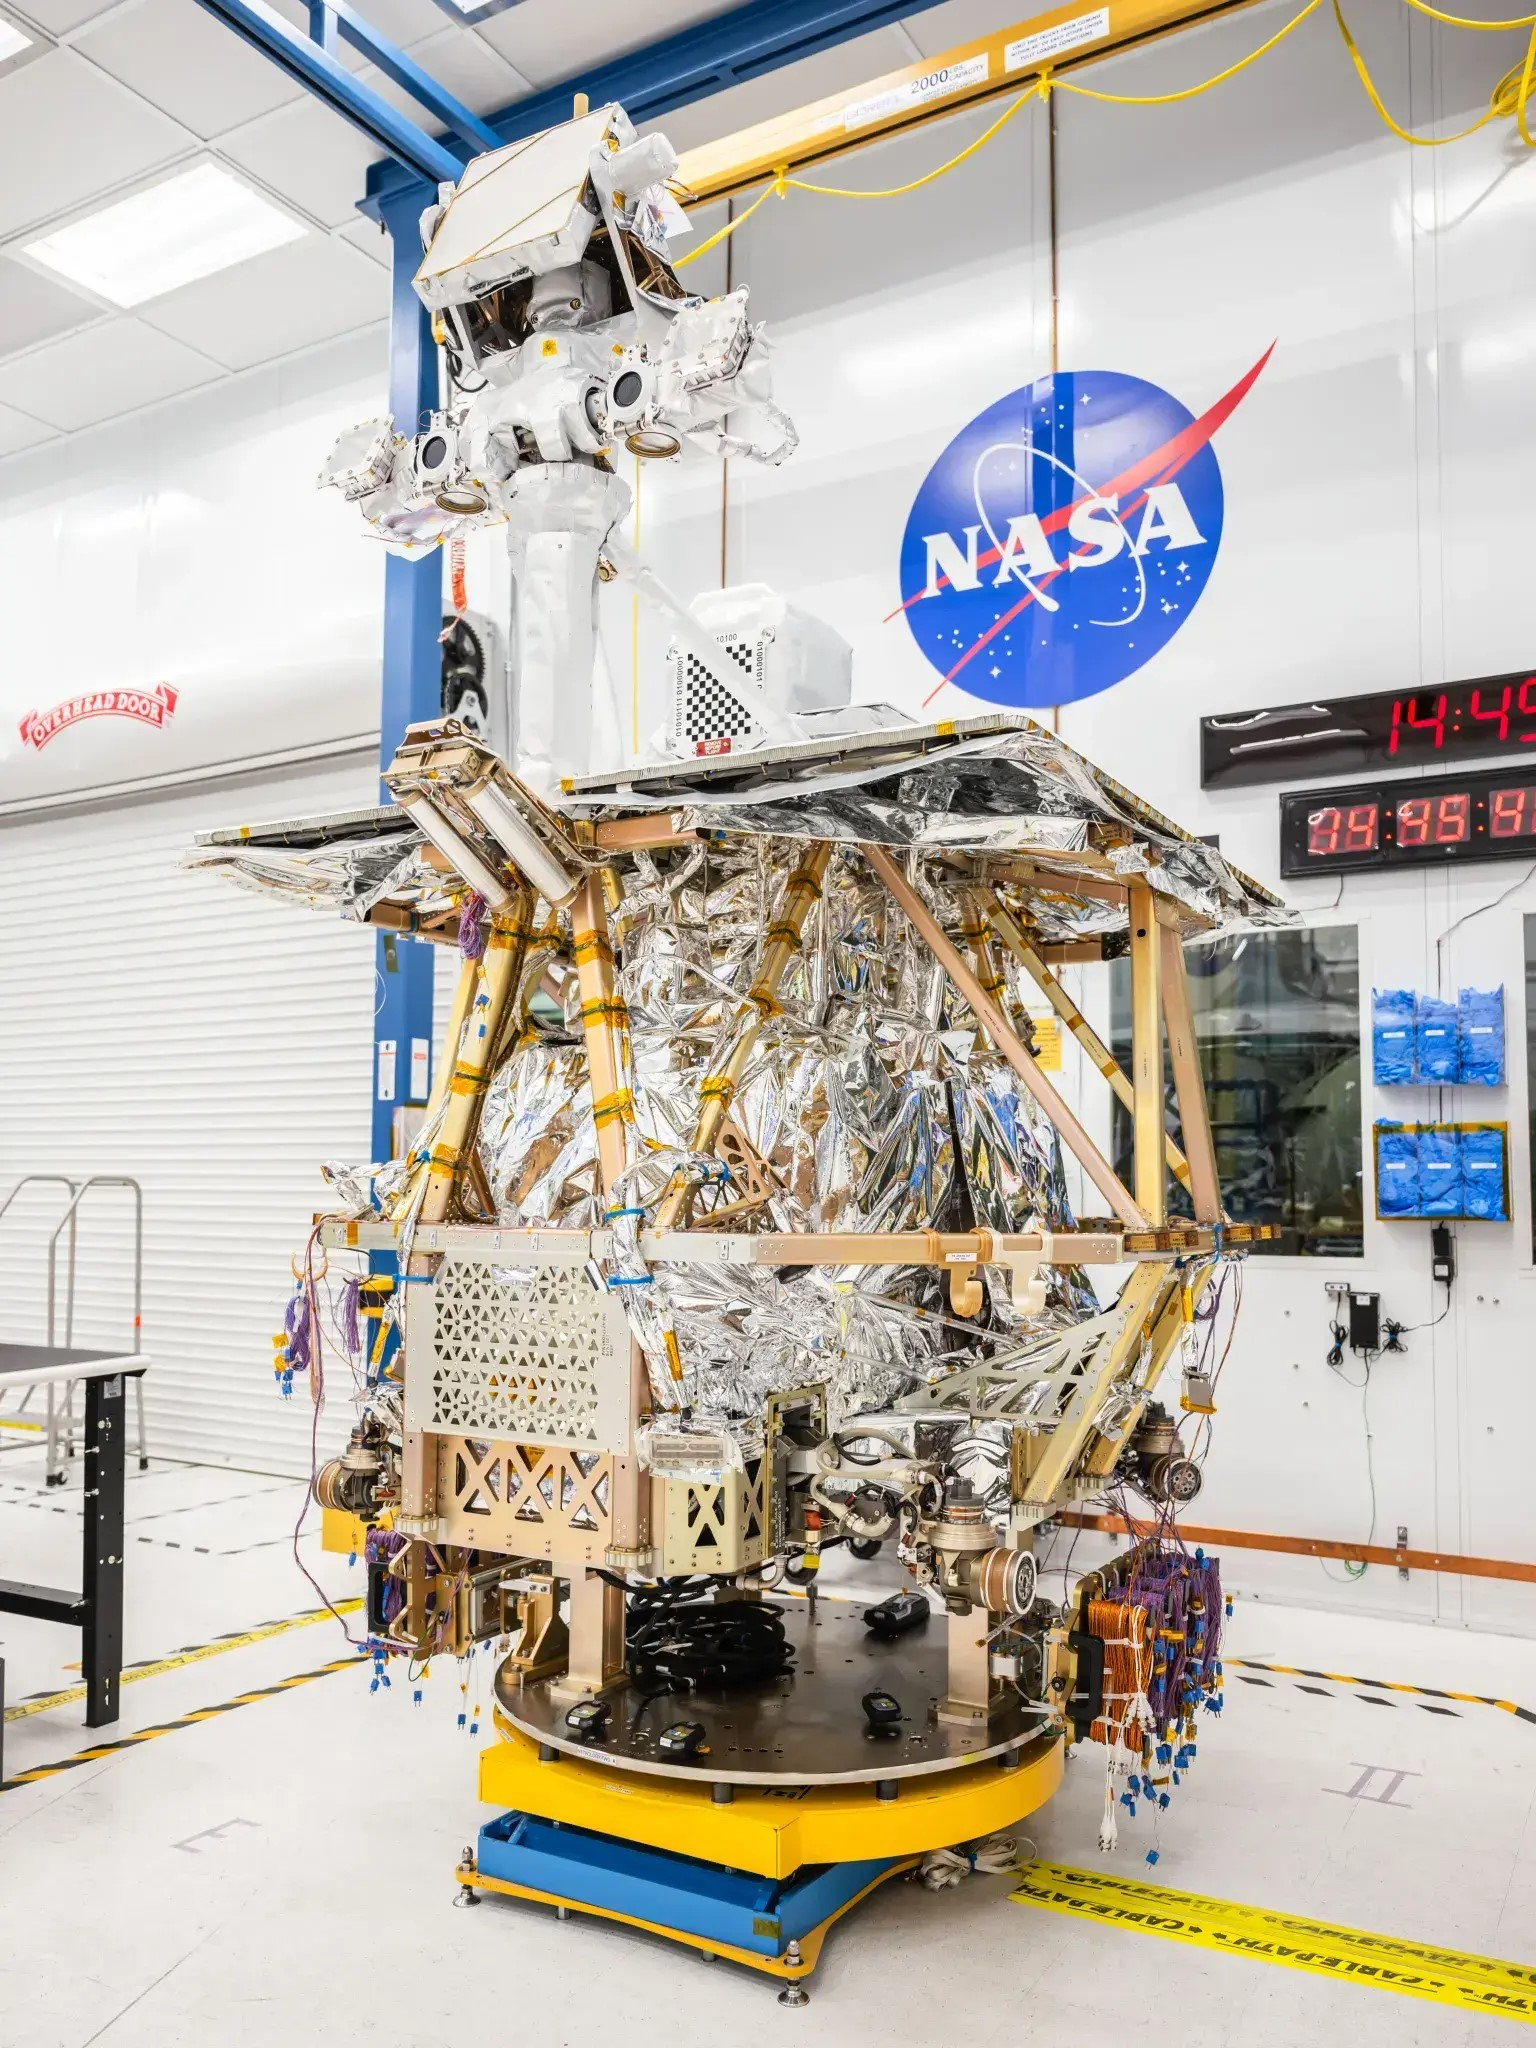 A foil-wrapped robotic explorer is stowed on a yellow mounting pad. a brass-pipe-looking frame of supports circles the body in a hexagonal pattern, with a rectangular shelf resting flat above. A mast in the top middle front supports an apparatus. The rover stands in a white room with a white floor and white ceiling. A NASA logo is painted on the wall in the background, above mounted data displays with red numbers.